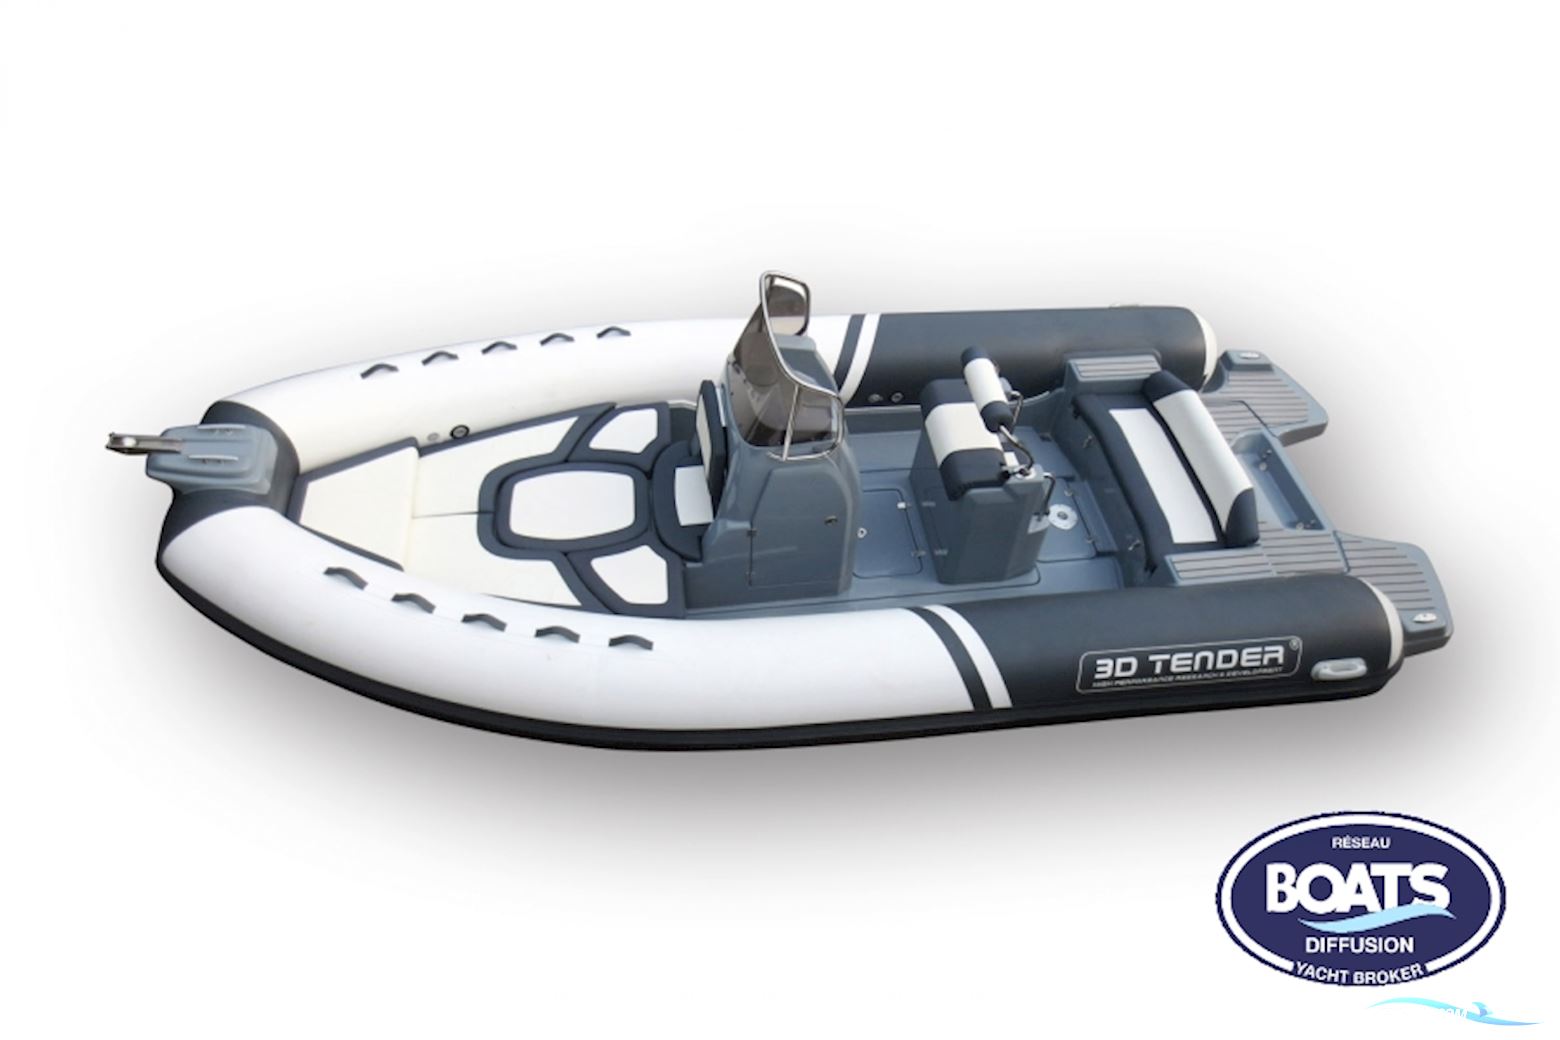 3D Tender 655 Inflatable / Rib 2020, with Mercury engine, France